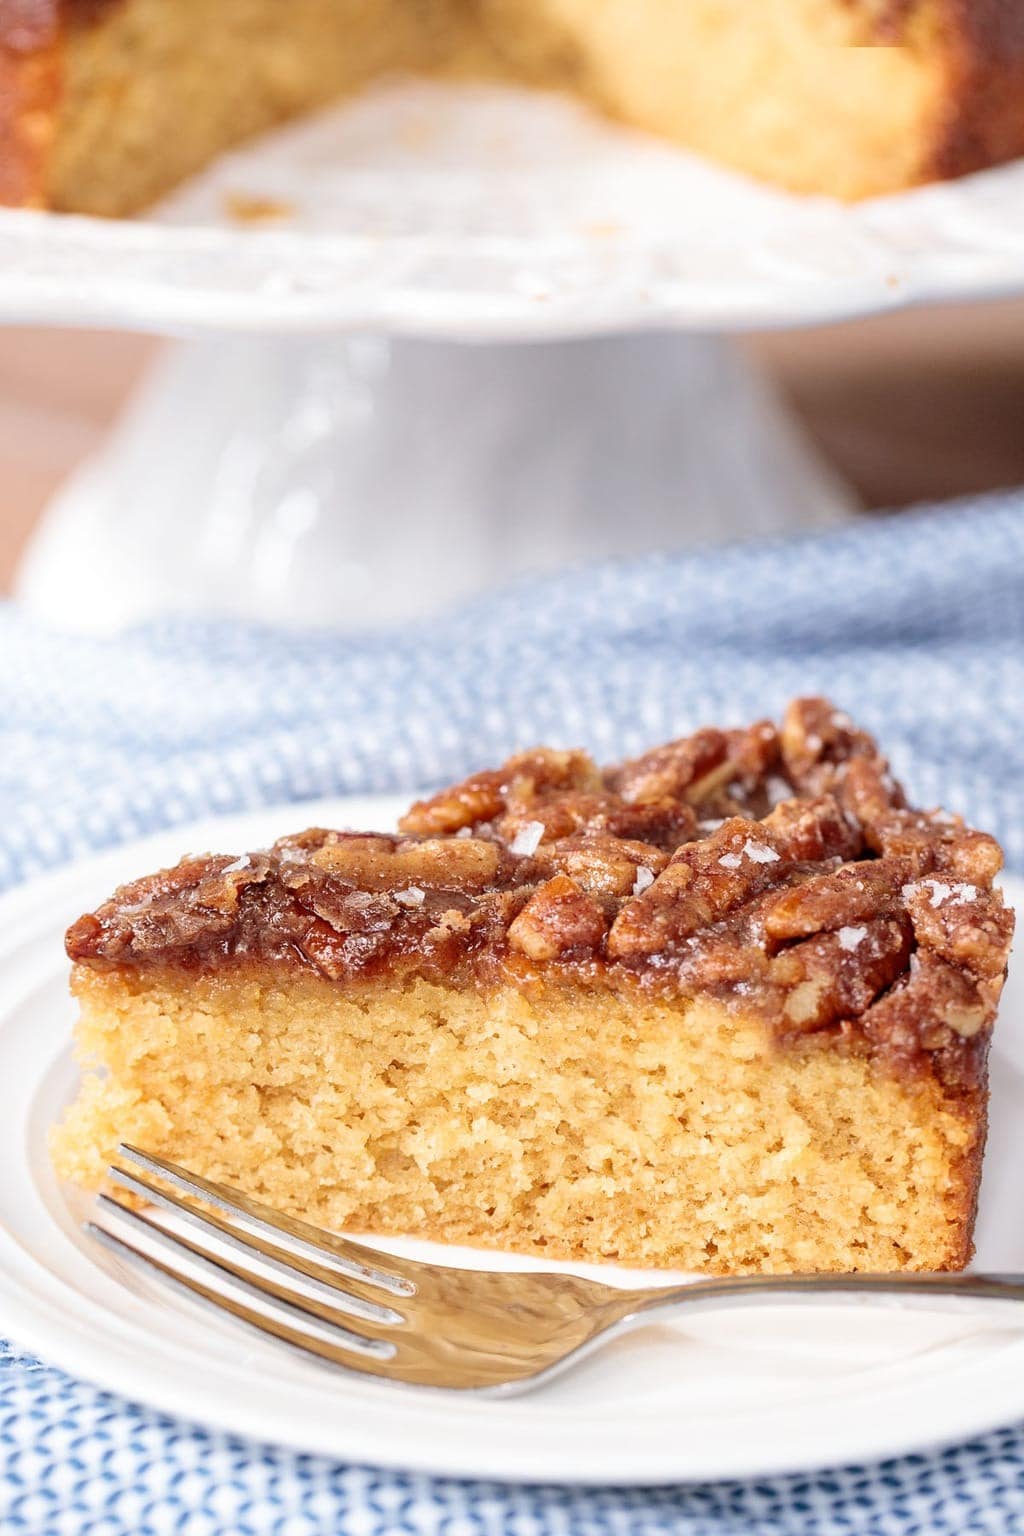 Slice of buttermilk cake with buttery pecan glaze on top served on a plate with stainless fork